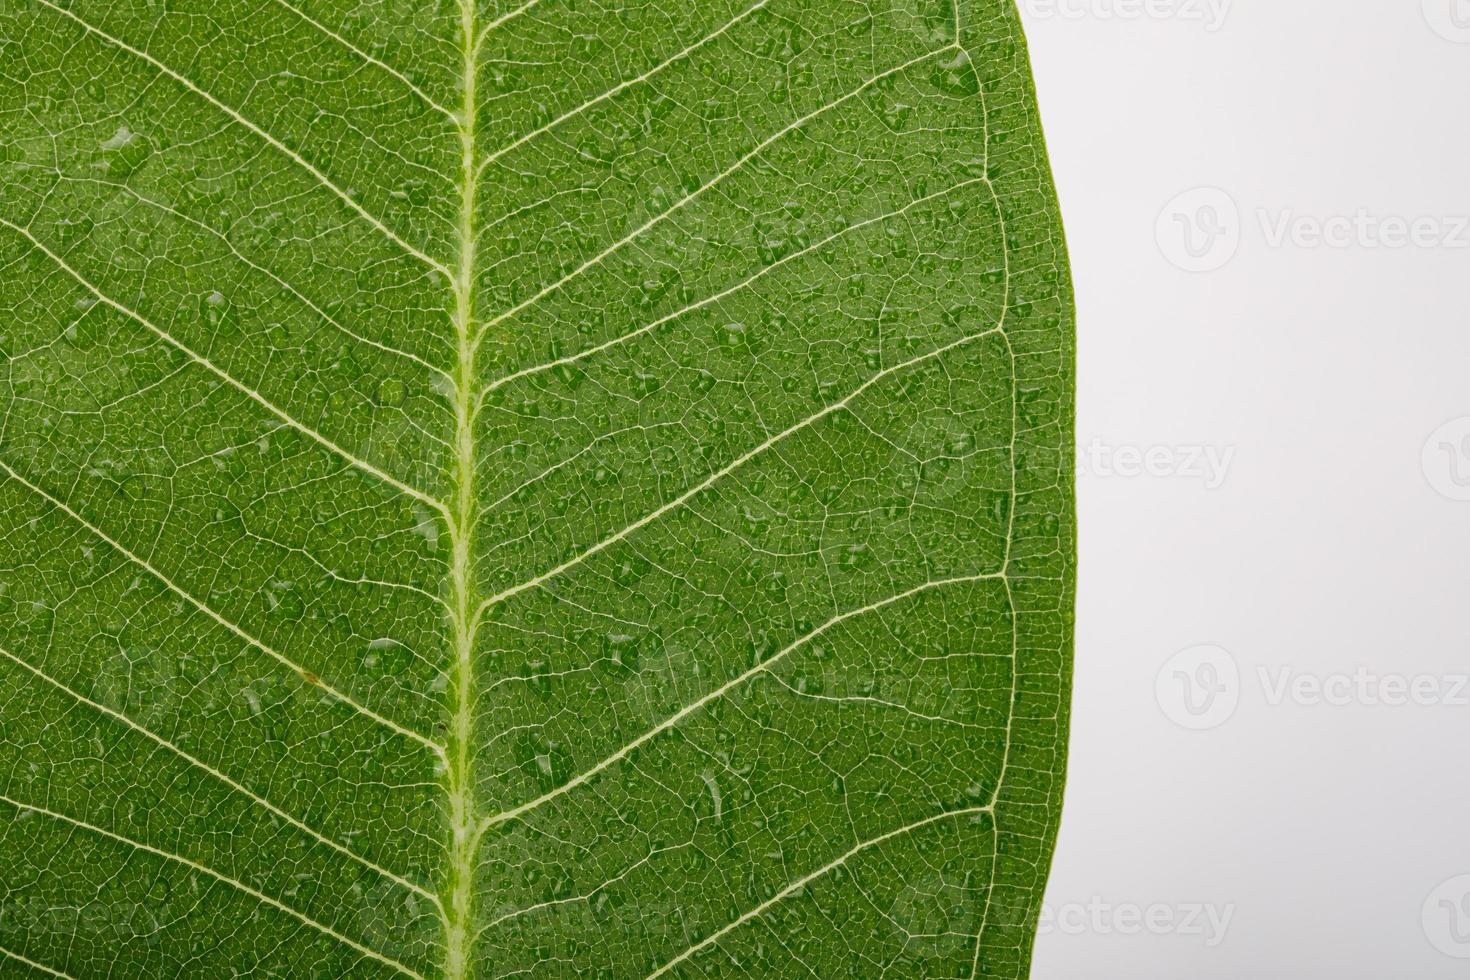 Skeletons and Texture of green leaf with water drop for background macro shot isolate on white background photo